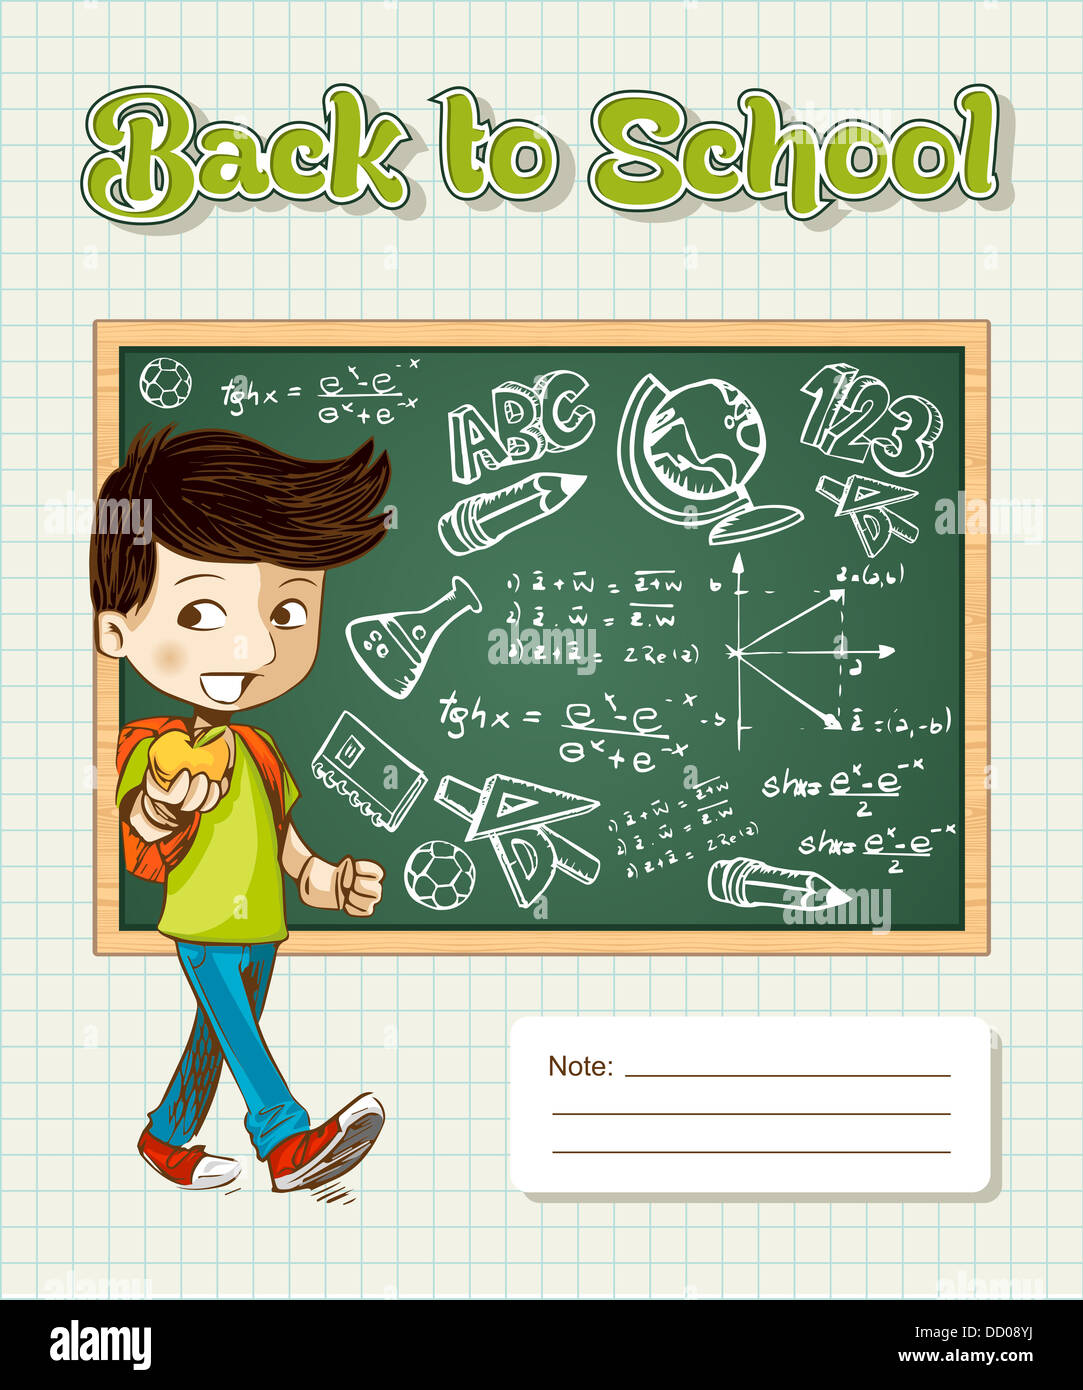 Education cartoon boy walk back to school, chalkboard grid sheet background. Vector file layered for easy personalization. Stock Photo